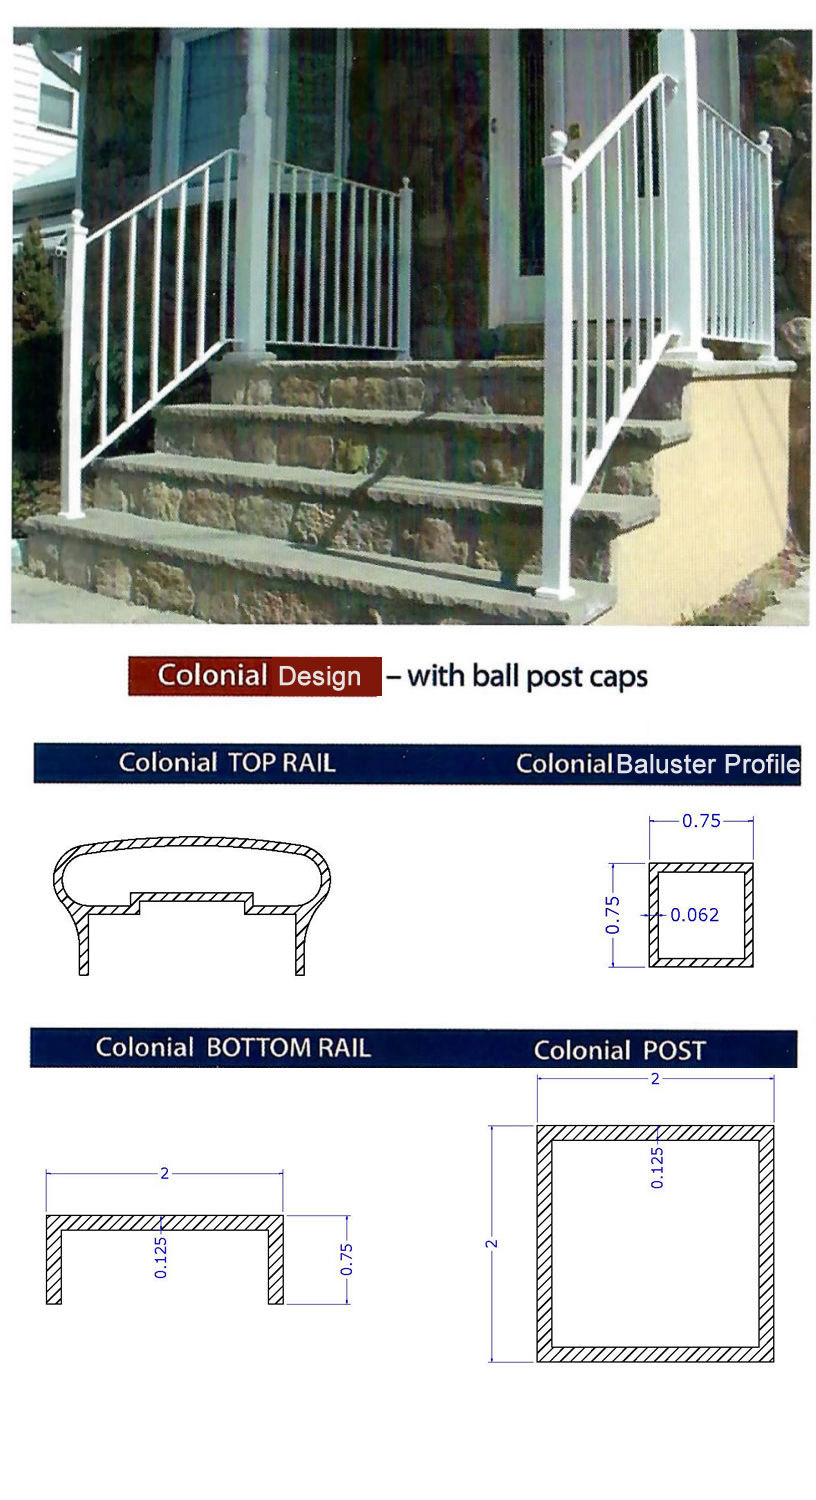 Colonial style railings